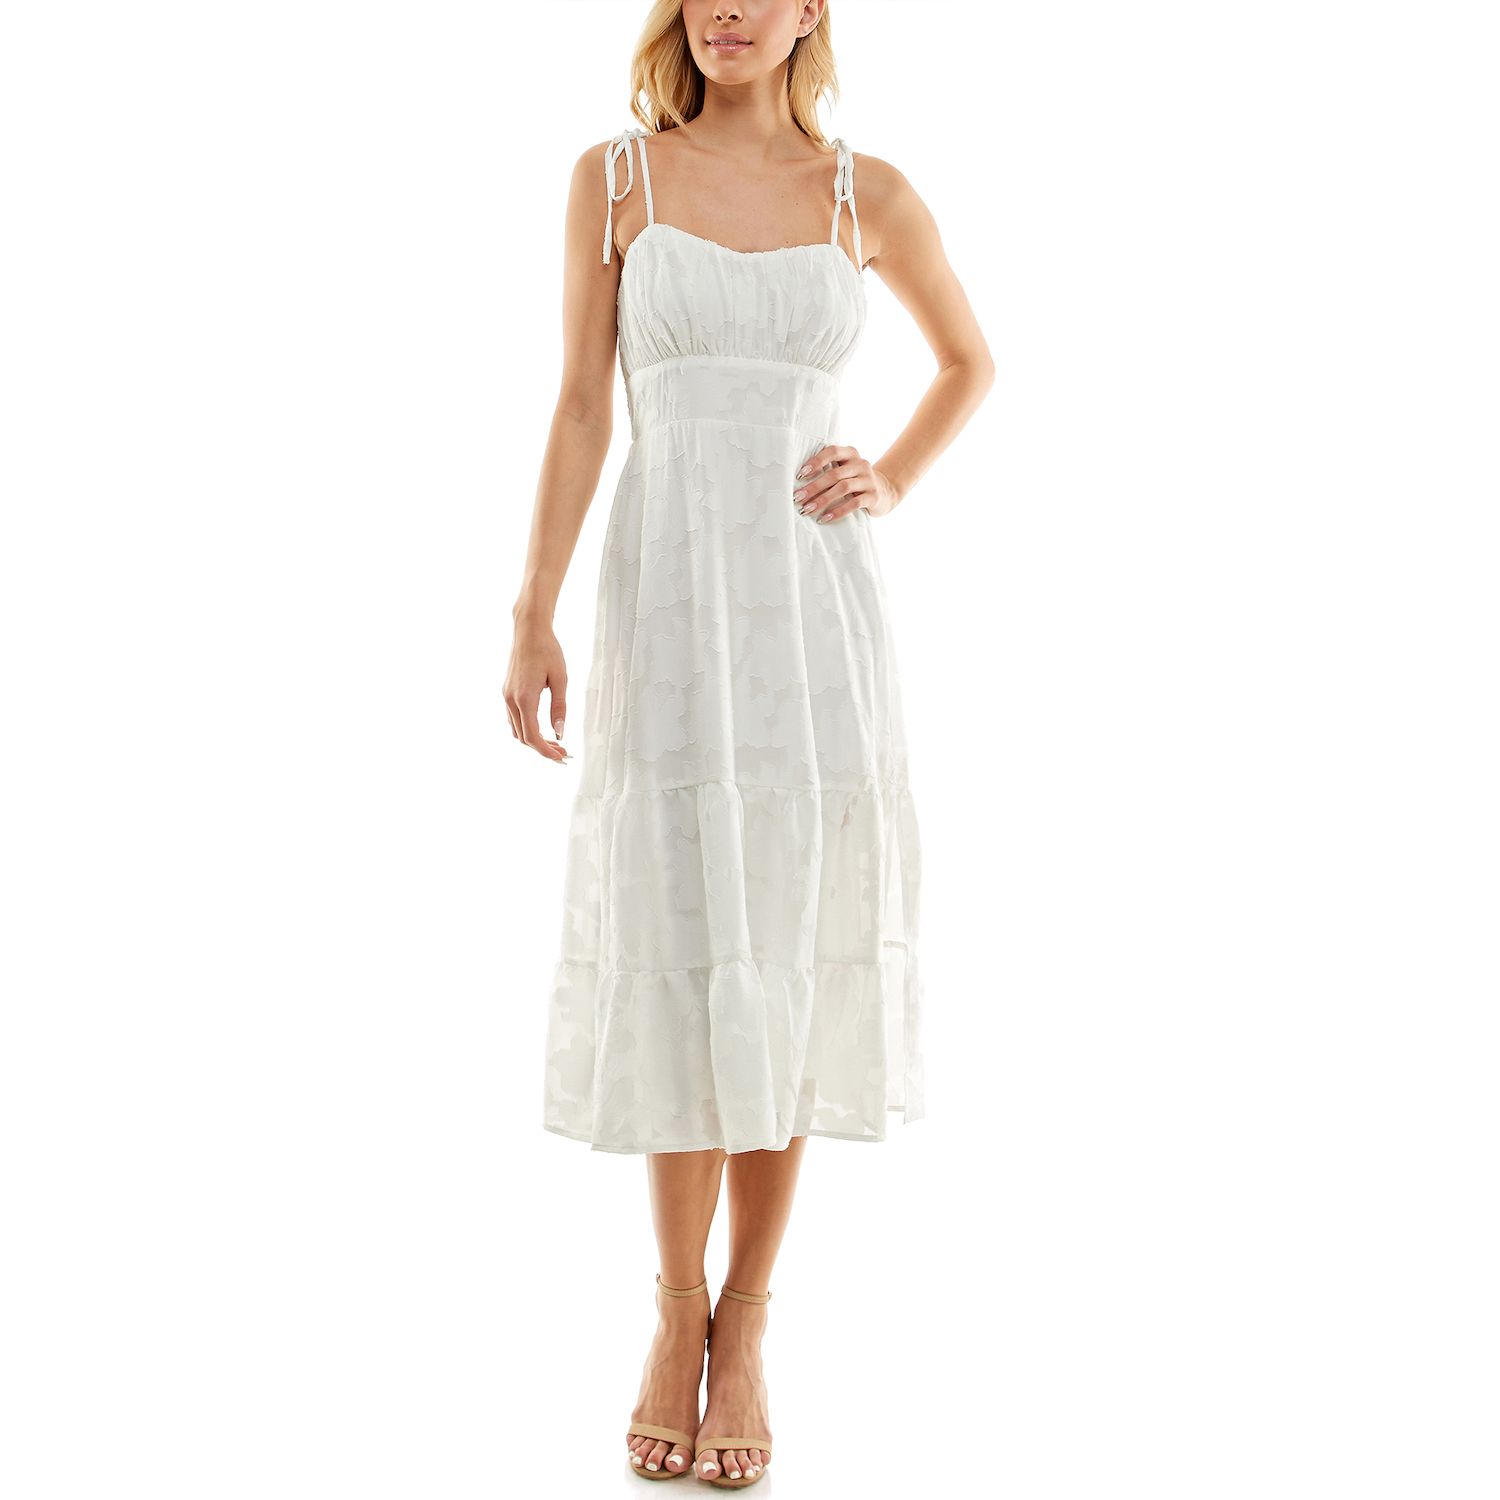 Juniors White Party Dresses, Clothing ...